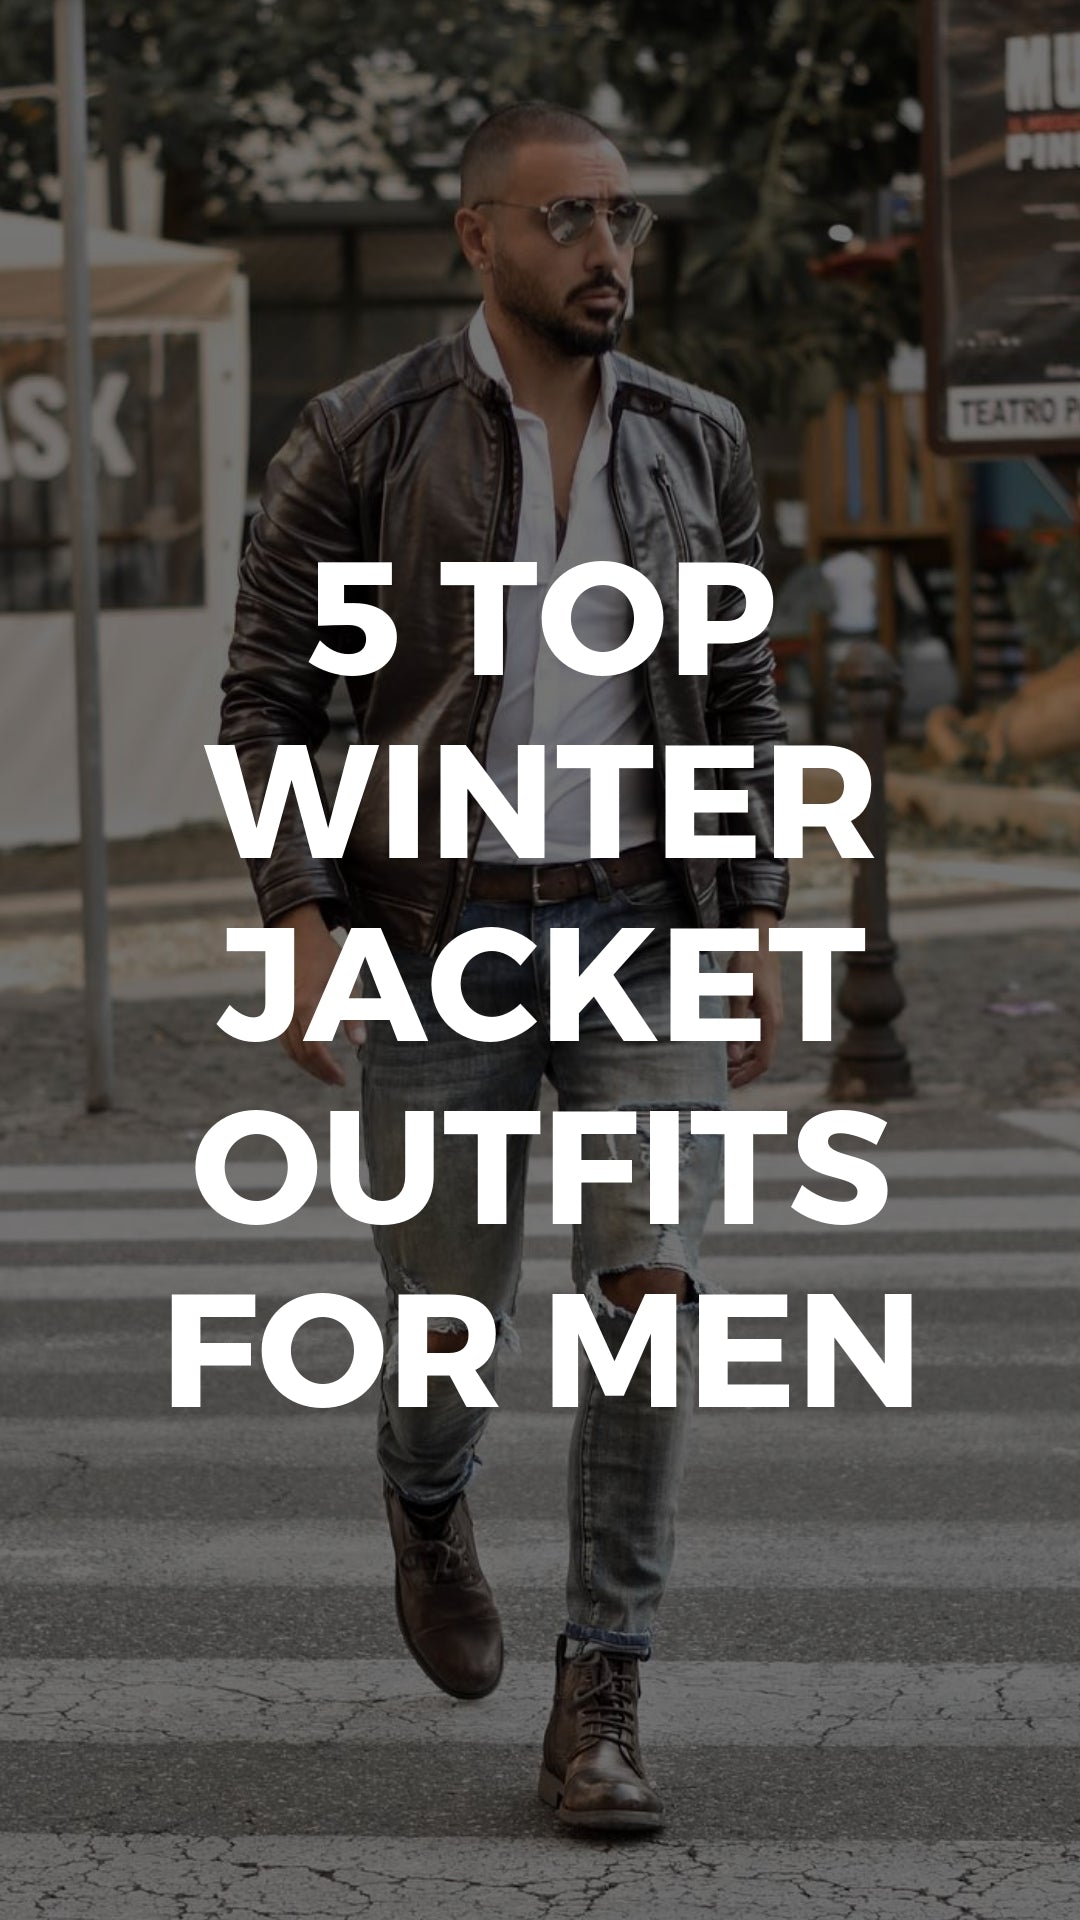 Cool winter jacket outfits for men. #mens #fashion #street #style